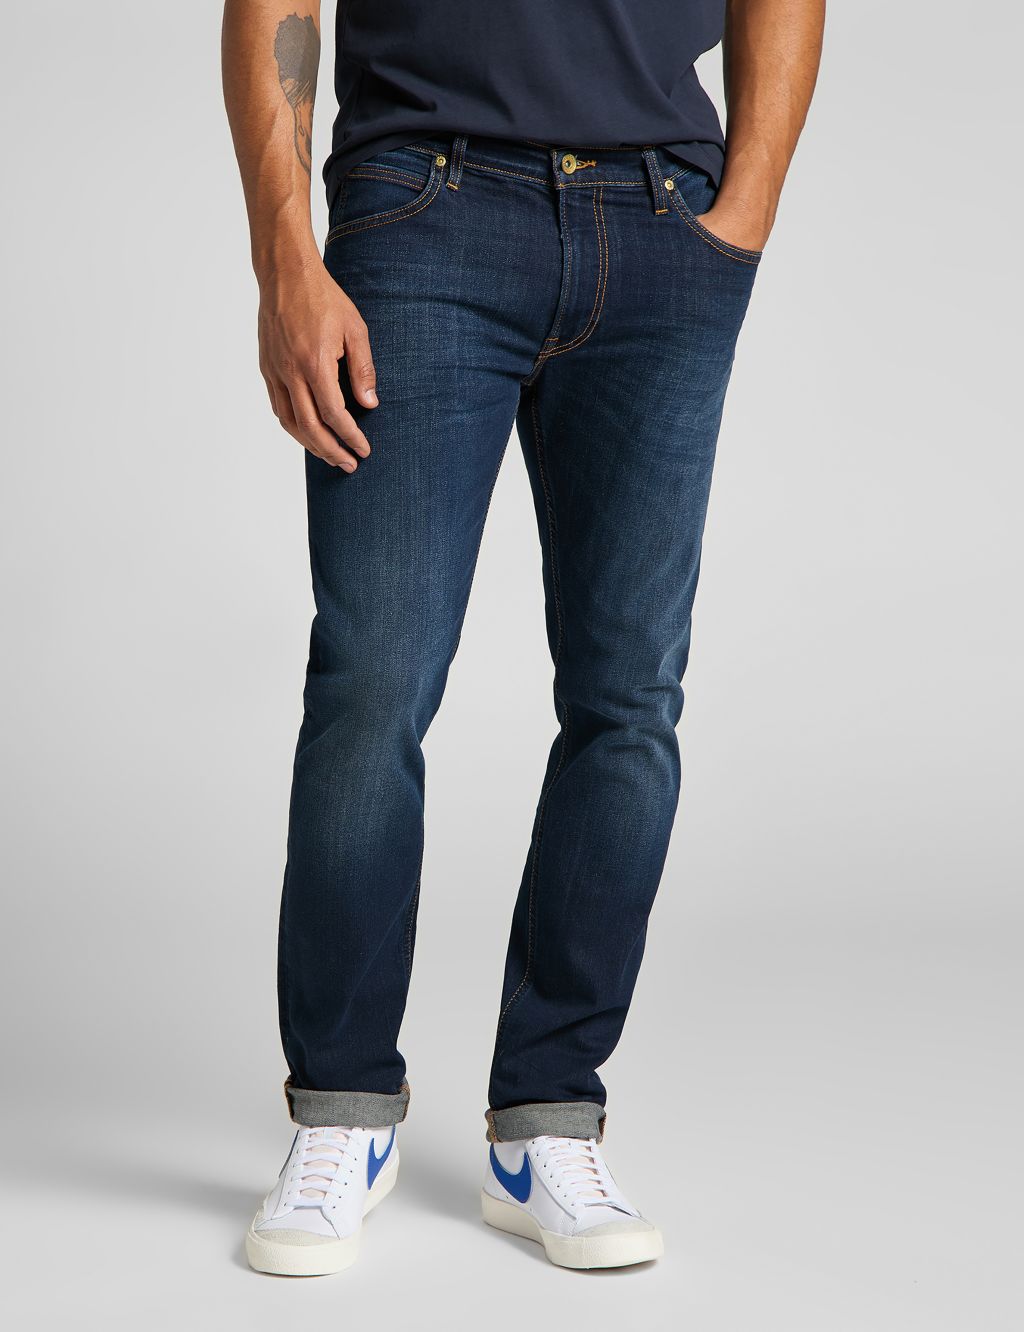 Men's Tapered Fit Jeans | M&S